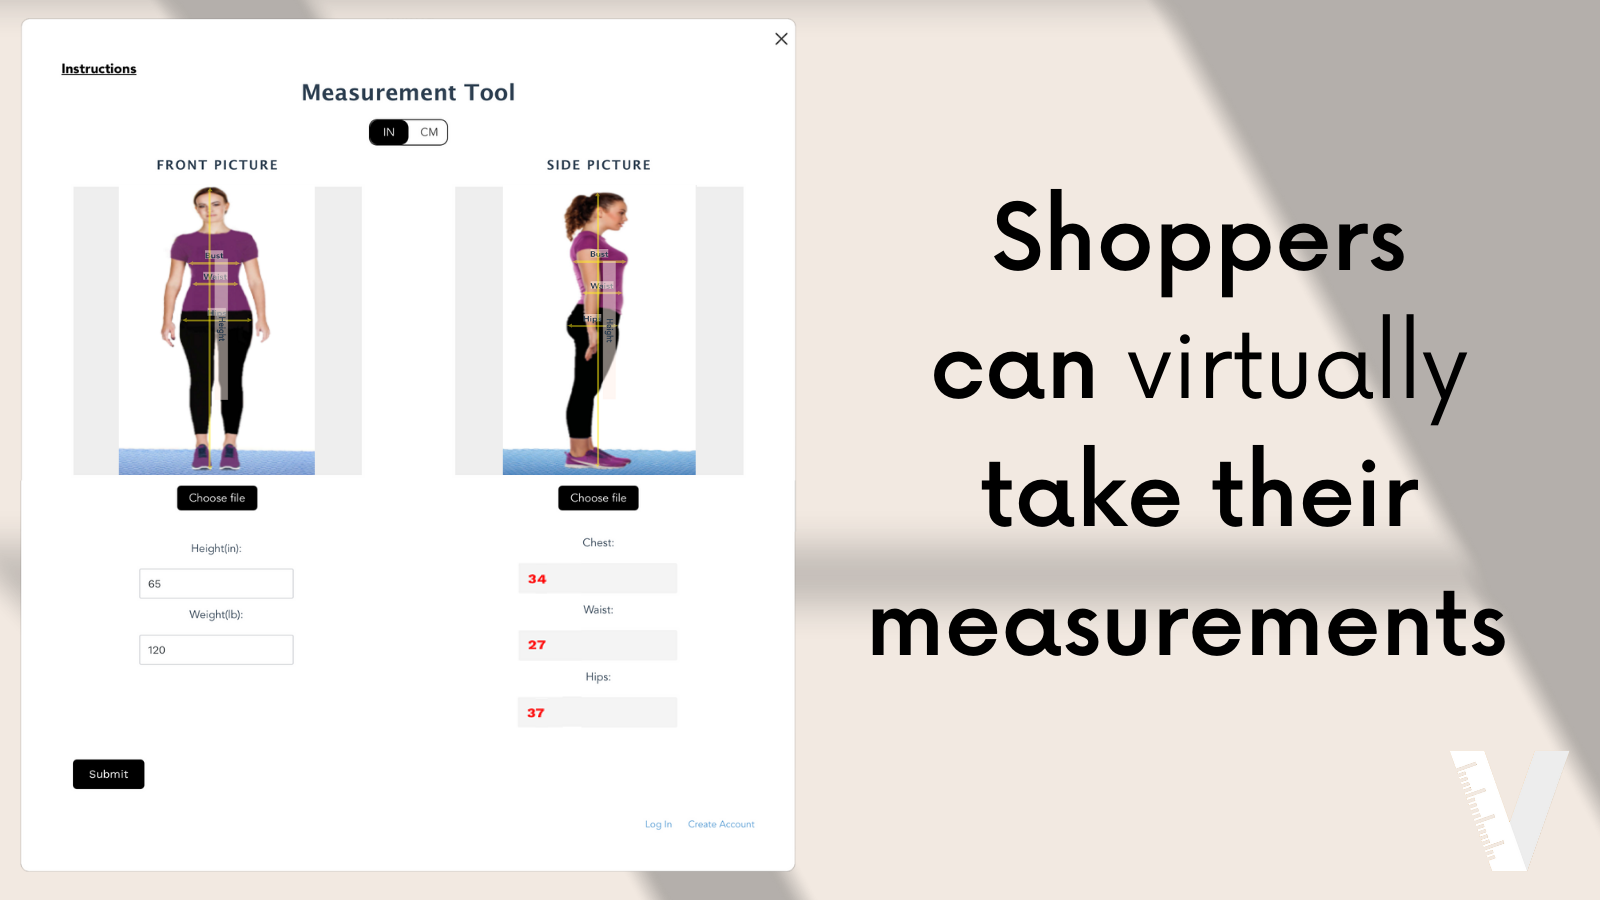 Shopper's can virtually take their measurements with 2 pictures